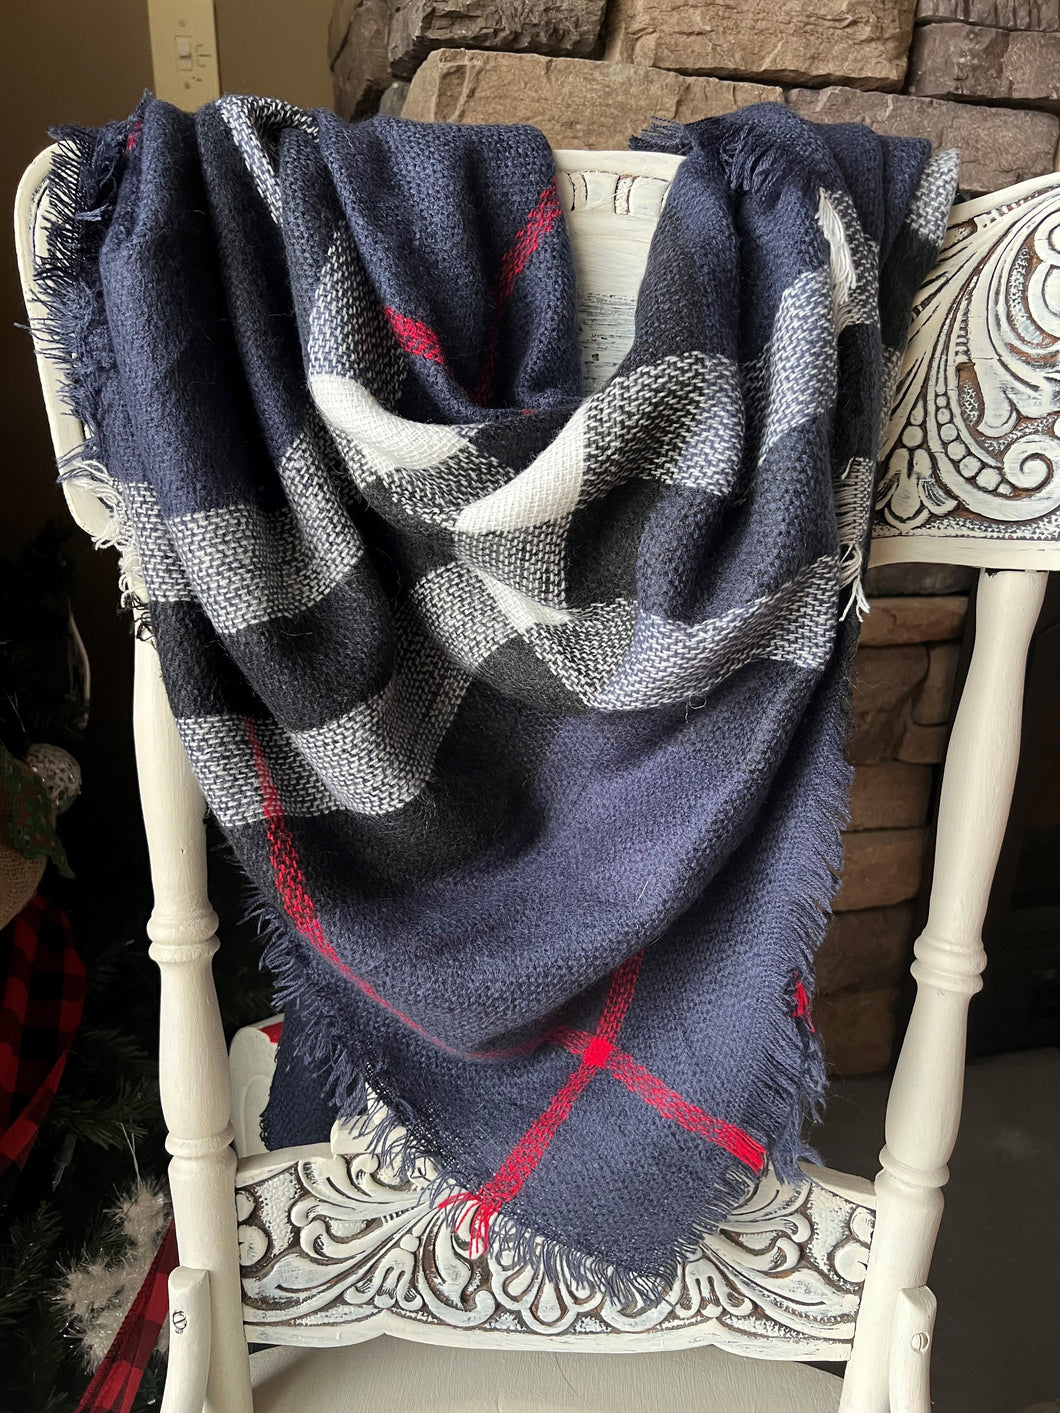 Plaid Blanket Scarf Blue/Blk/Red/Wht As Shown